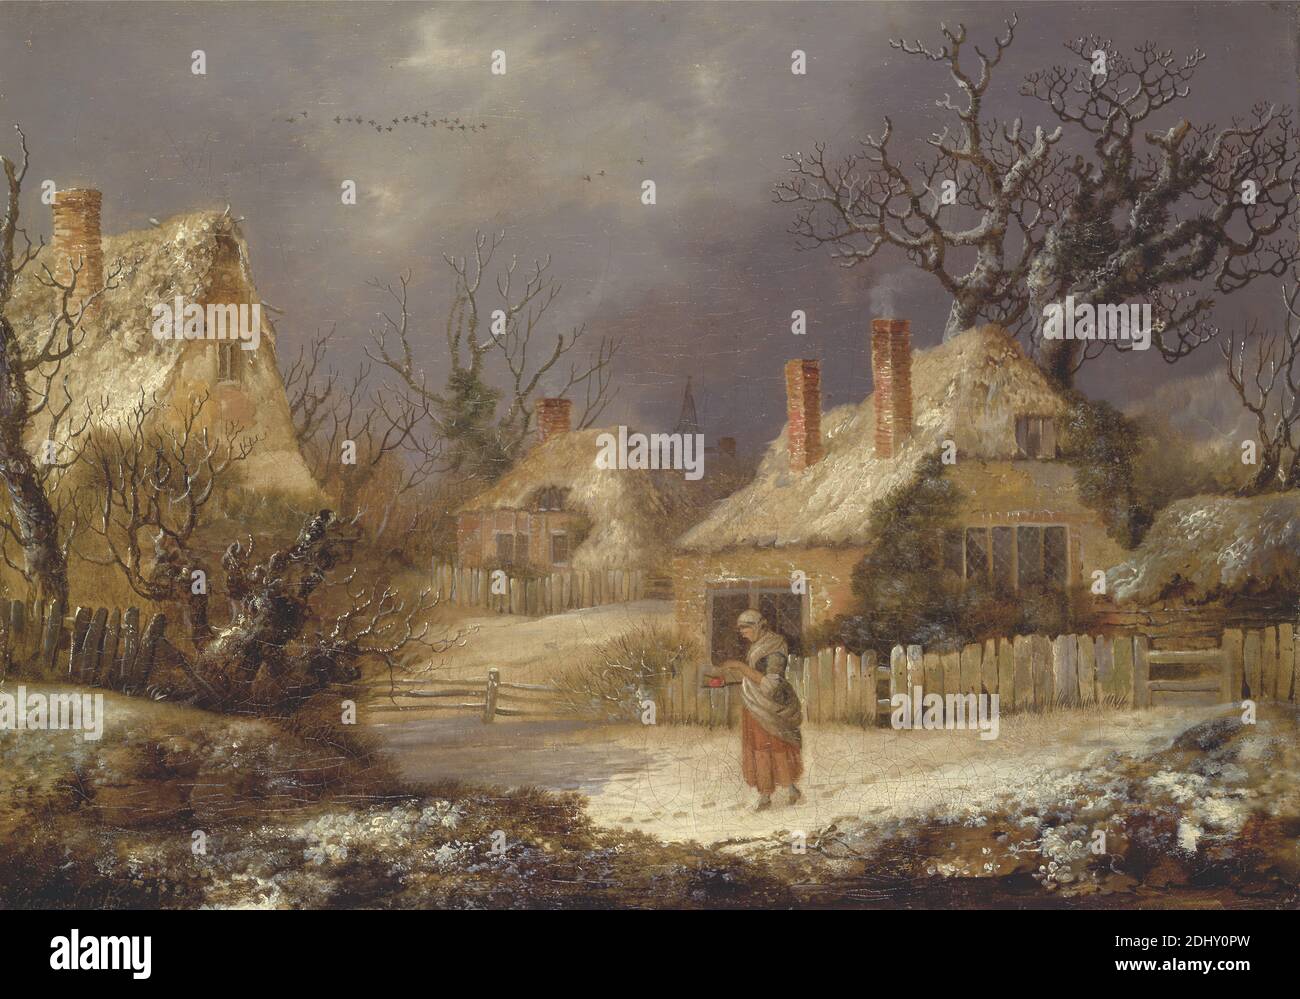 A Winter Landscape, George Smith, 1714–1776, British, ca. 1770, Oil on canvas, Support (PTG): 11 7/8 x 16 3/4 inches (30.2 x 42.5 cm), birds, chimneys, costume, cottages, fence, houses, landscape, path, peasant, snow, village, winter, woman Stock Photo